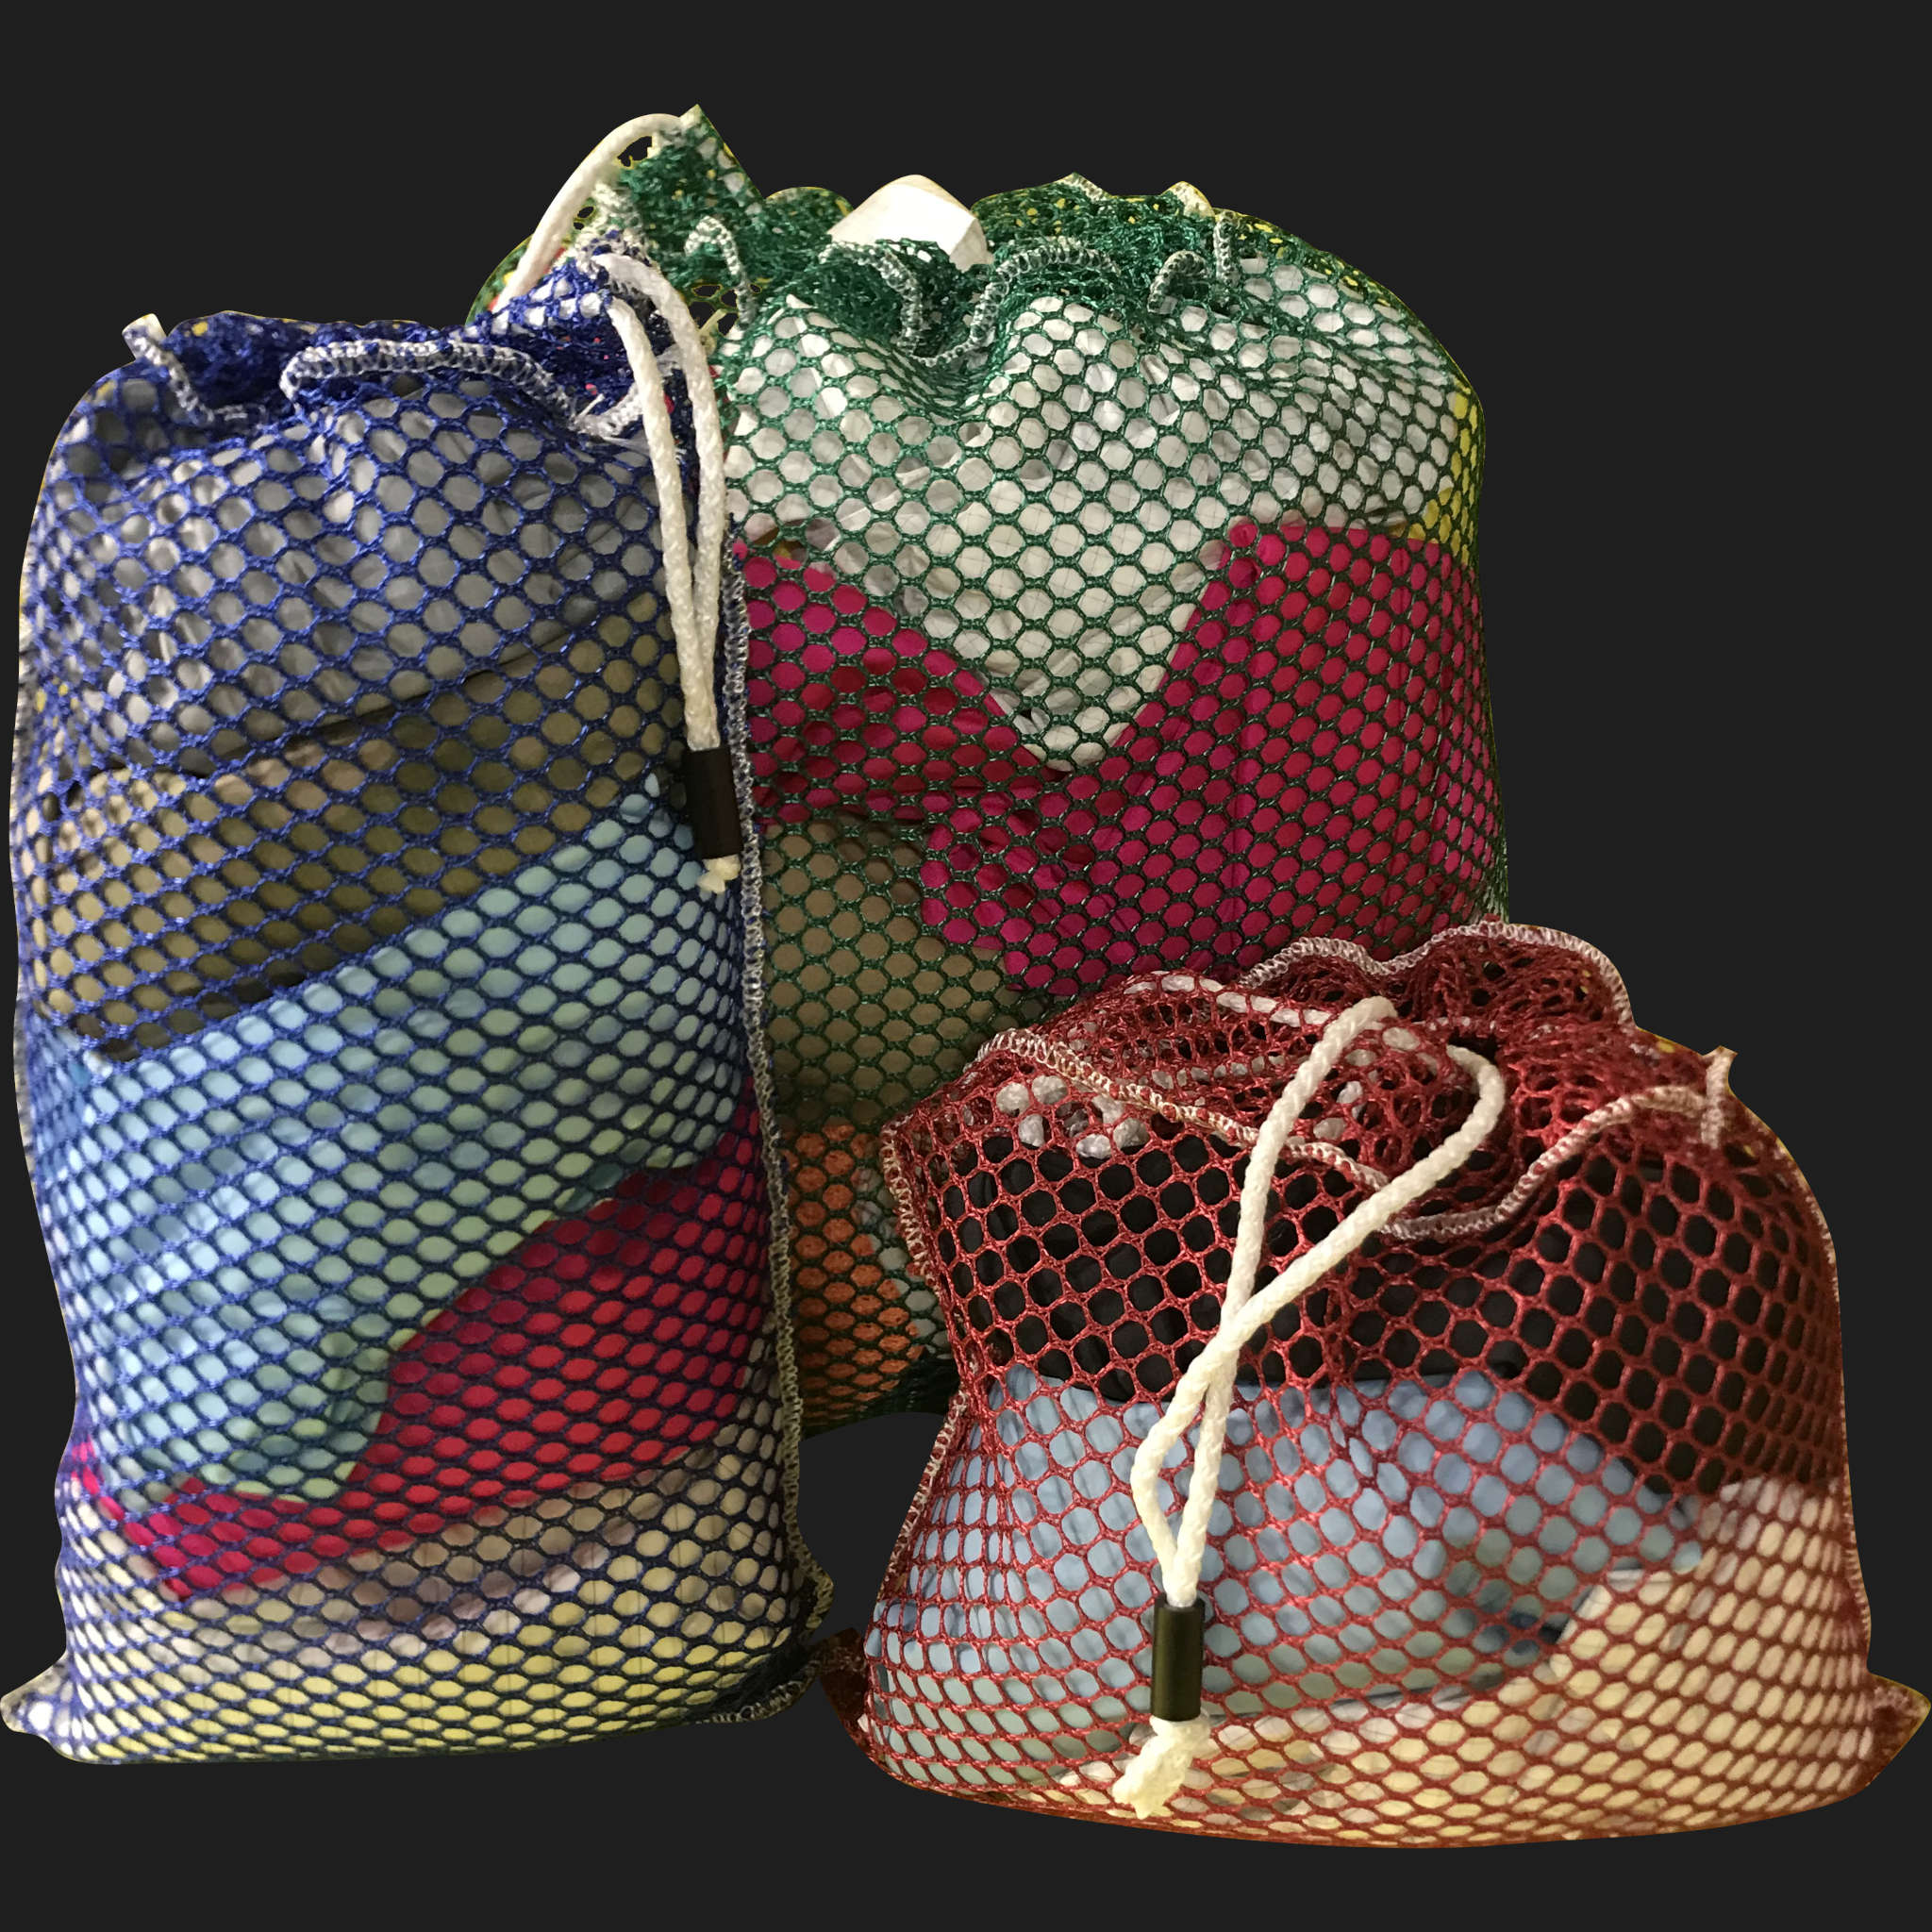 44" x 50" Customized Mesh-Net-Laundry Bags Heavy Duty with Cord and barrellock closure